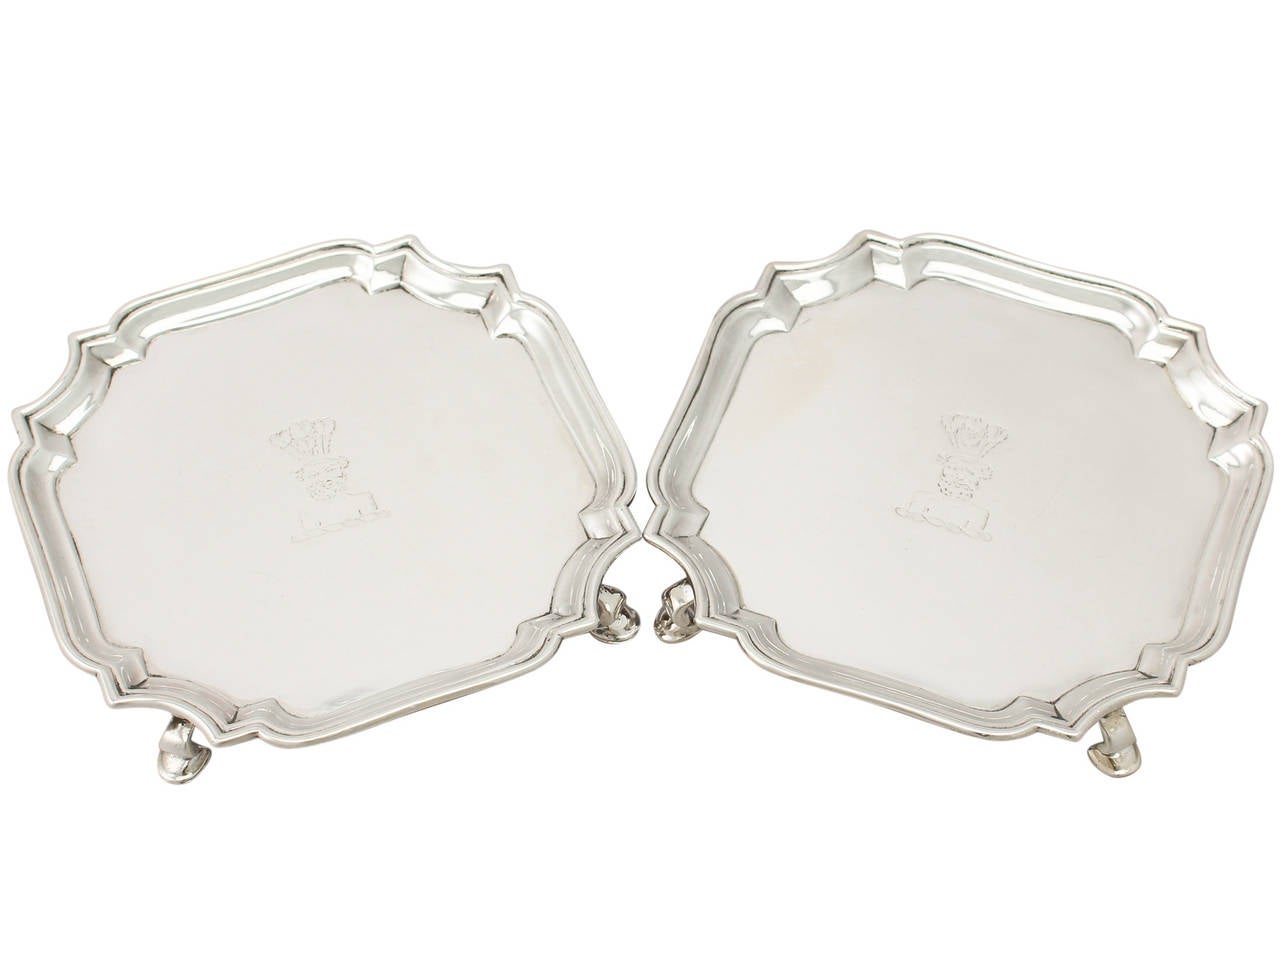 A fine and impressive pair of antique Georgian English sterling silver waiters, an addition to our silver tray, salver and platter collection.
These fine antique George II sterling silver waiters have a Classic plain square form with shaped